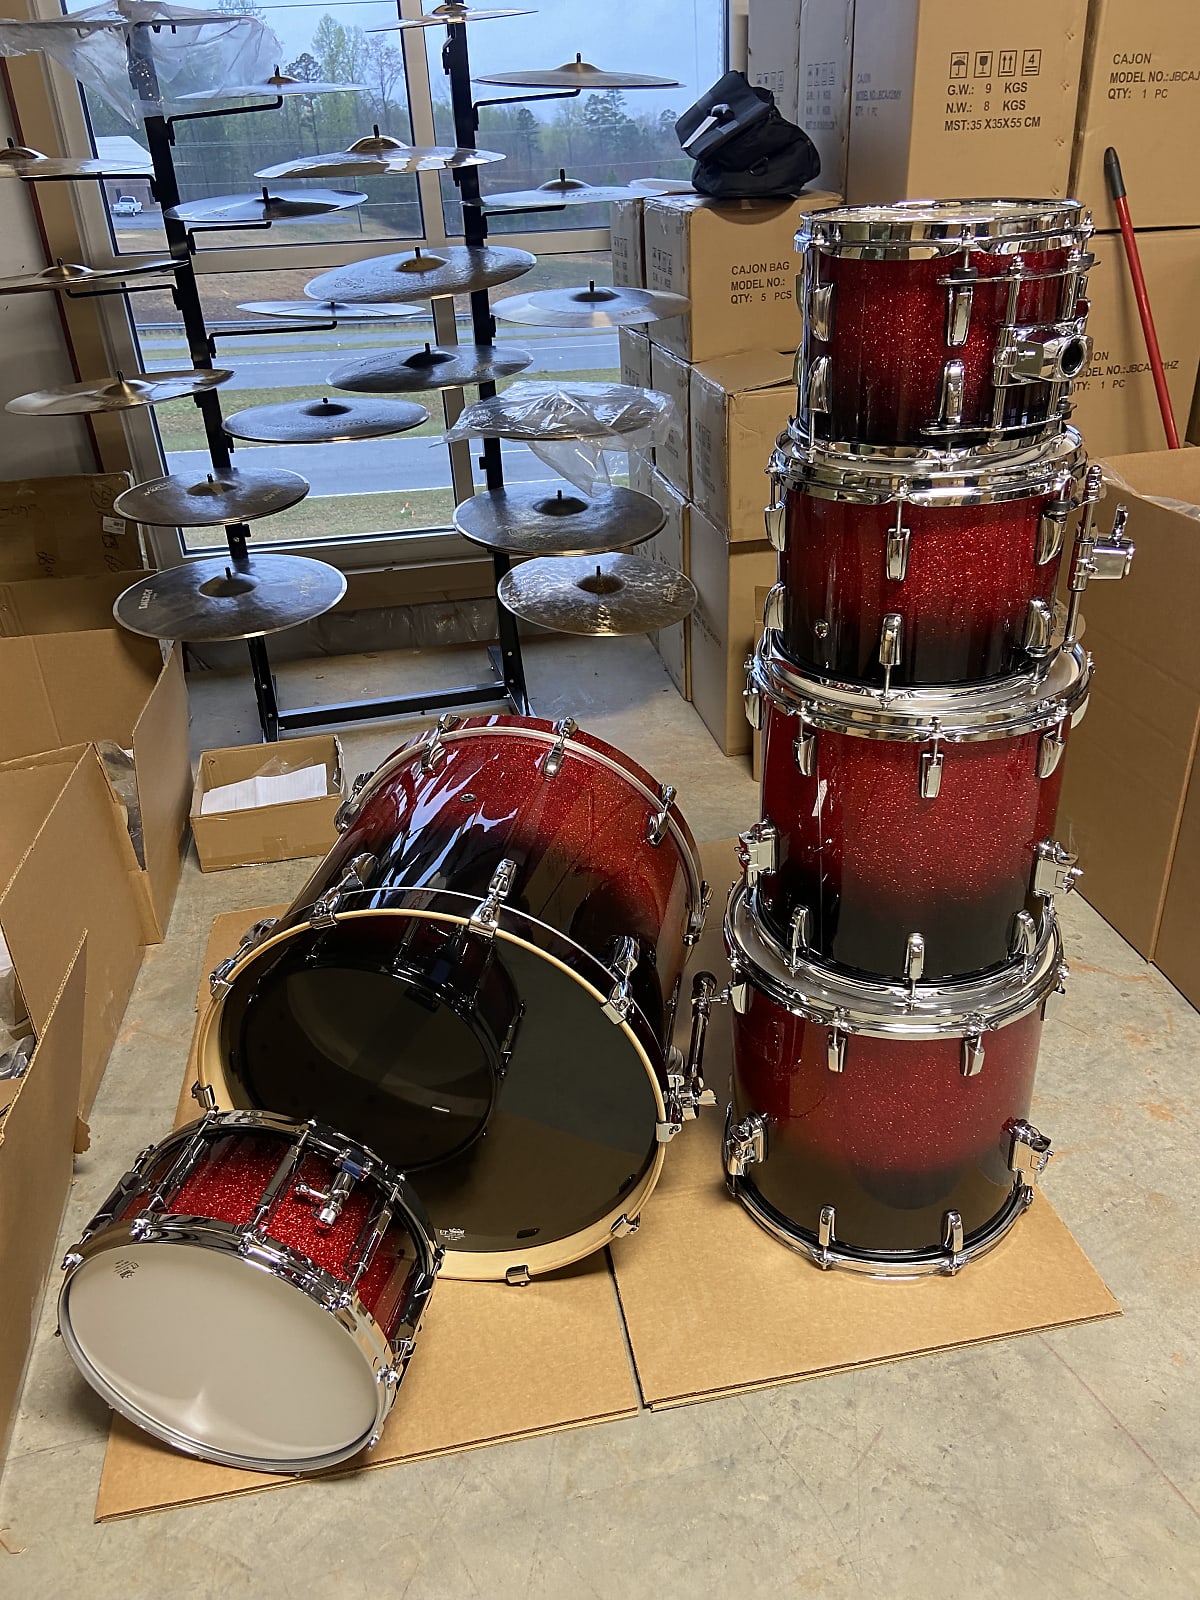 Birch Red Sparkle Fade Lacquer Shell Pack - 6 Piece